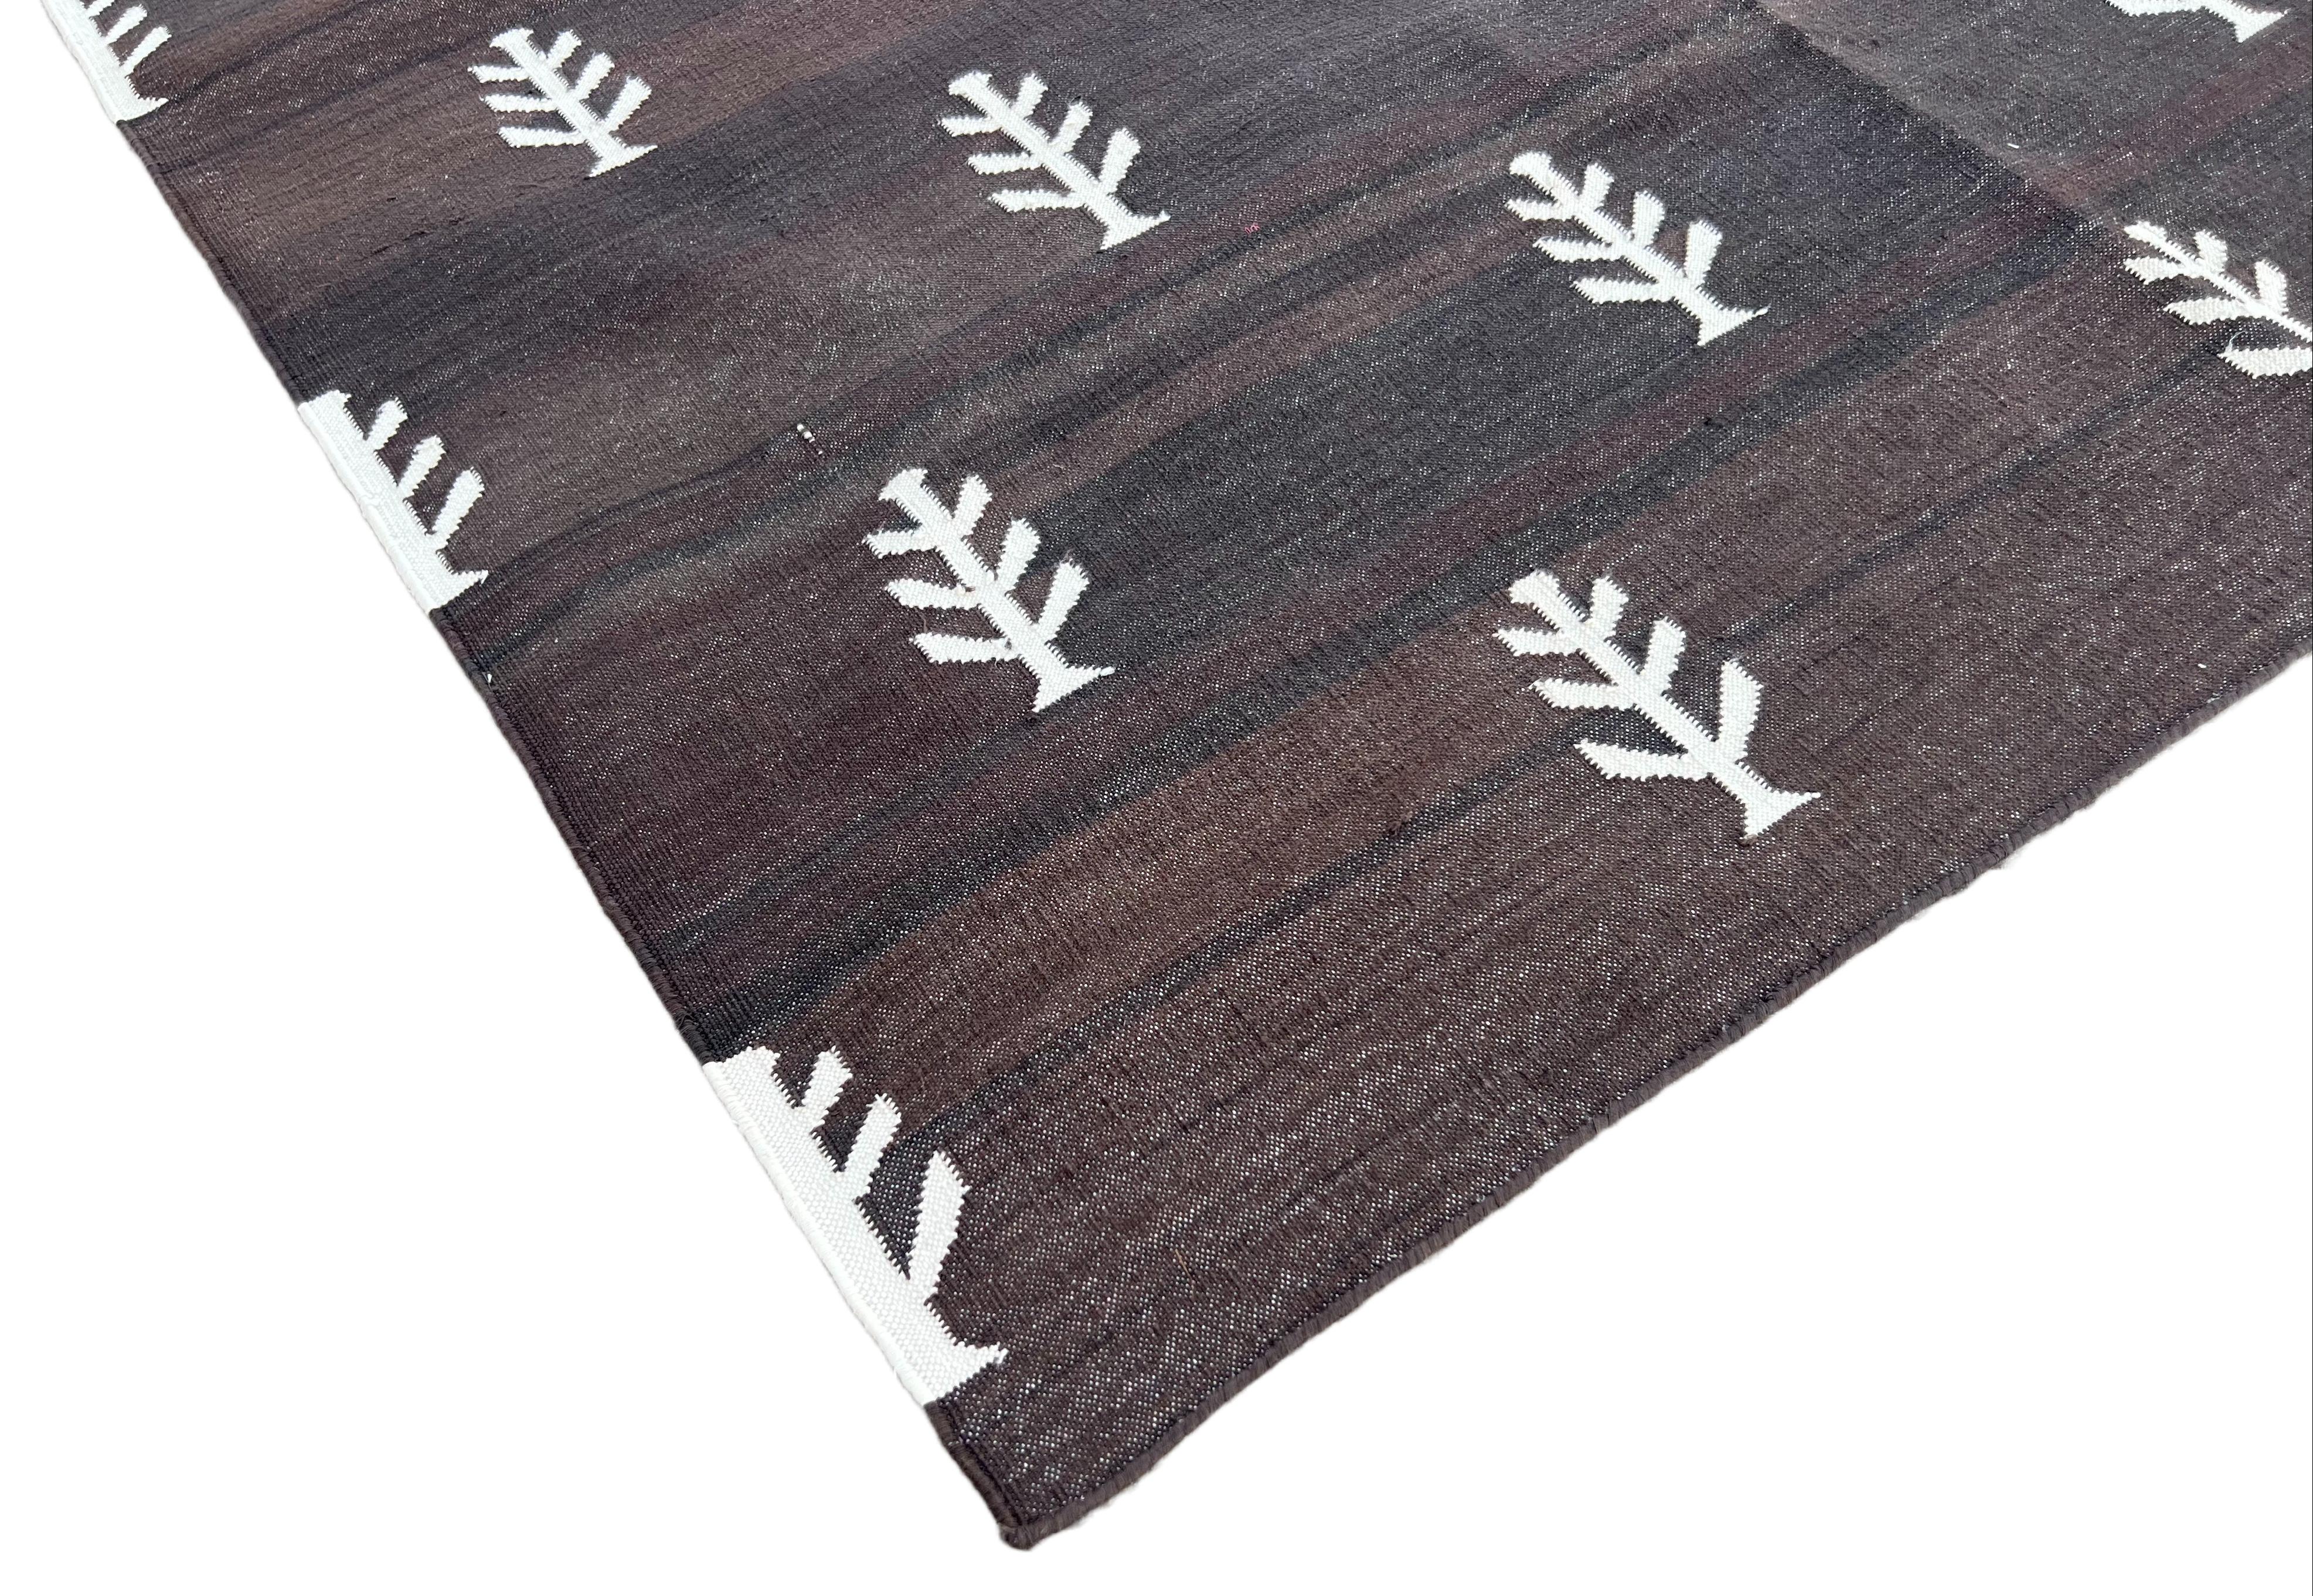 Mid-Century Modern Handmade Cotton Area Flat Weave Rug, Brown & White Tree Patterned Indian Dhurrie For Sale